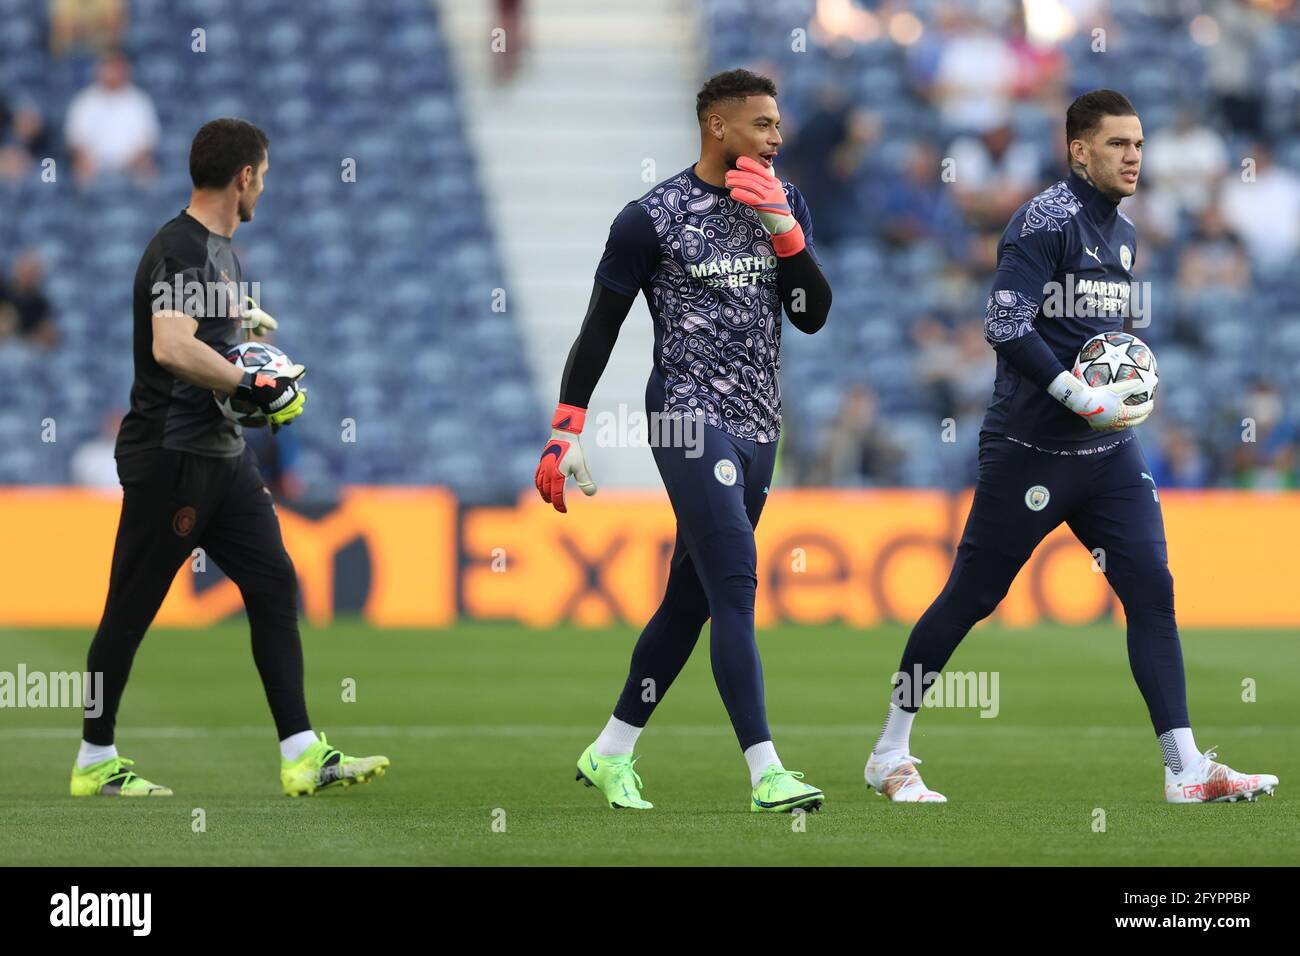 PORTO, PORTUGAL - MAY 29: Zack Steffen [left] and Ederson [right] of Manchester City before the UEFA Champions League Final between Manchester City and Chelsea FC at Estadio do Dragao on May 29, 2021 in Porto, Portugal. (Photo by MB Media) Stock Photo